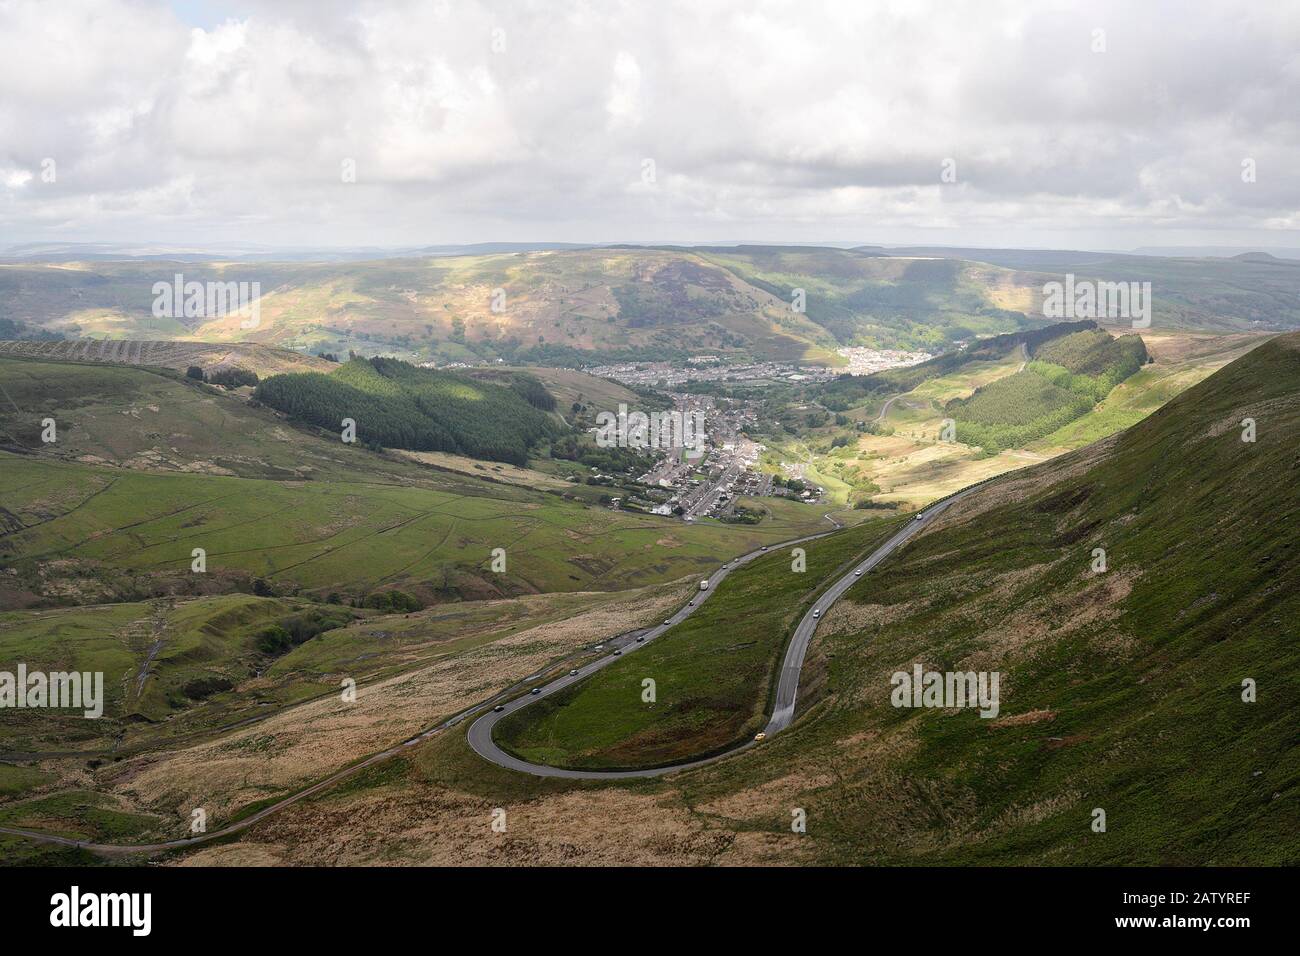 View of the Rhondda valley towards Treorchy and Cwmparc from the Bwlch mountain pass, Wales, Welsh Valleys Stock Photo